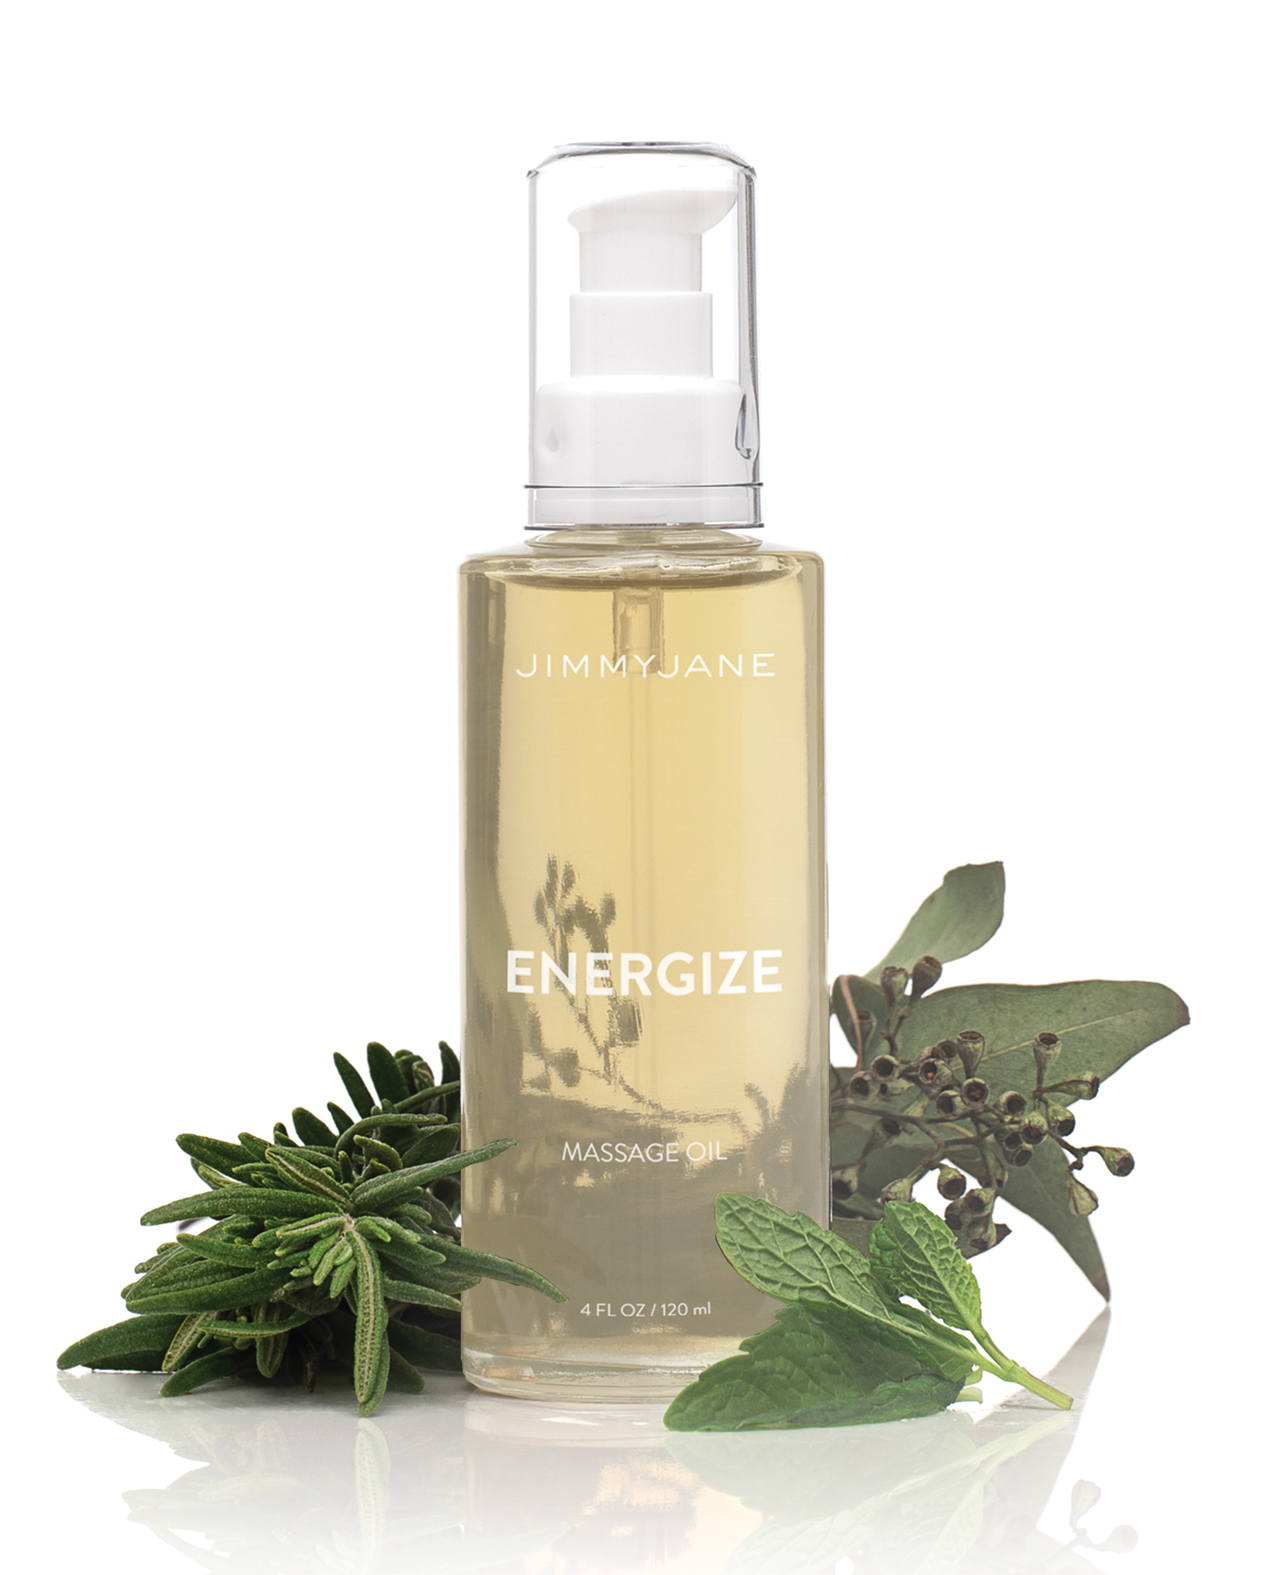 JimmyJane Energize Massage Oil - 4 oz in a clear bottle with leaves scarred around it